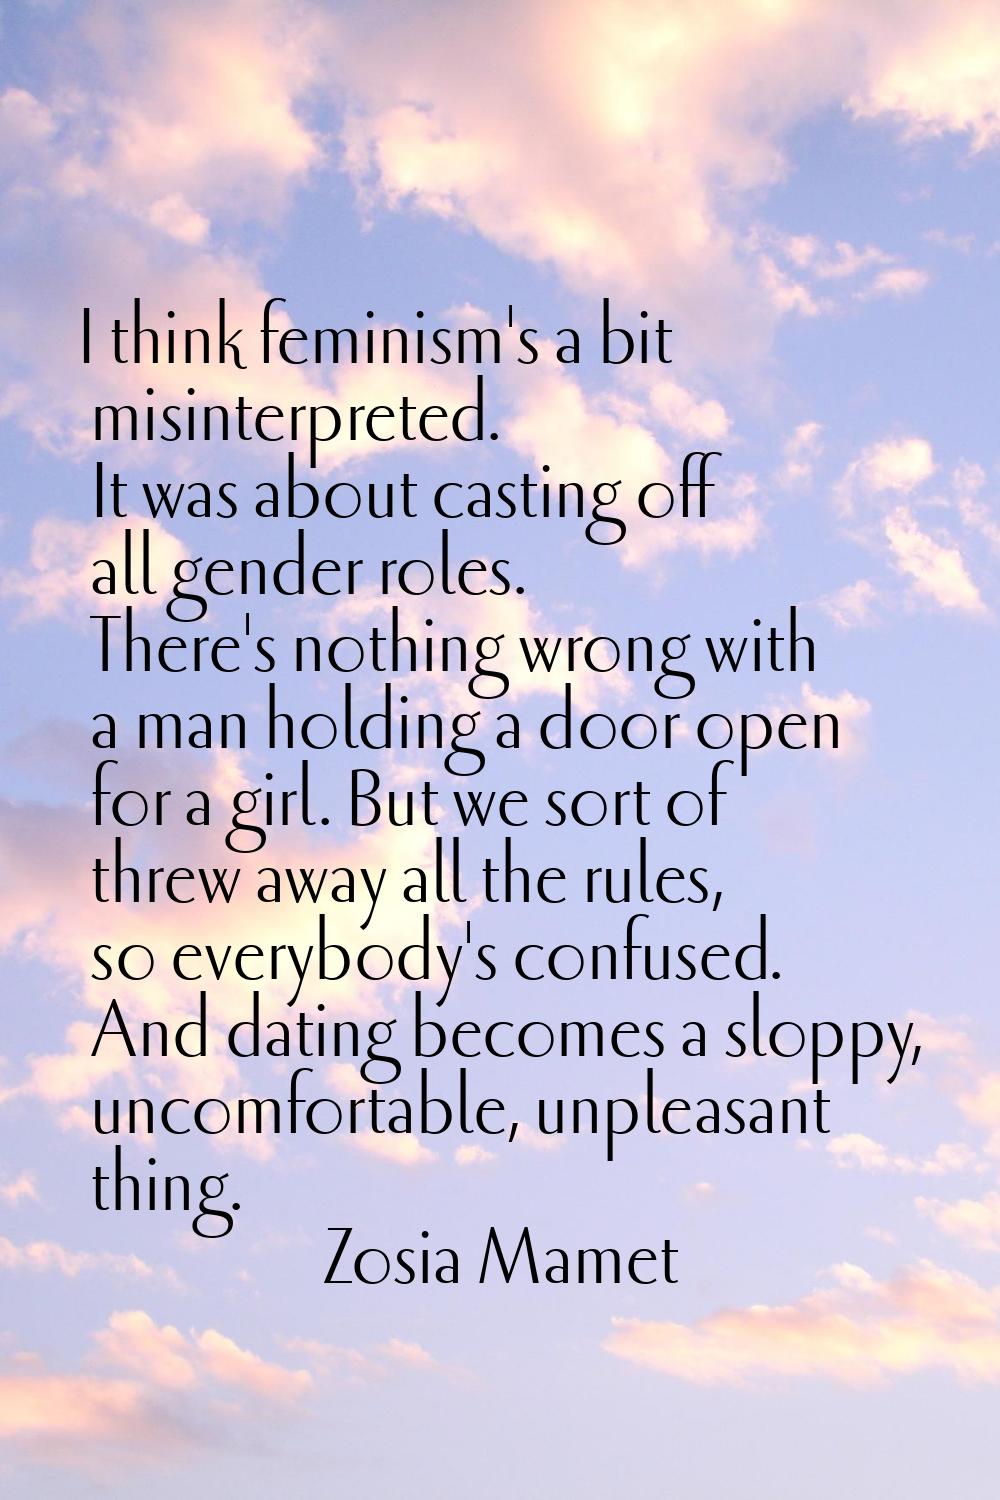 I think feminism's a bit misinterpreted. It was about casting off all gender roles. There's nothing